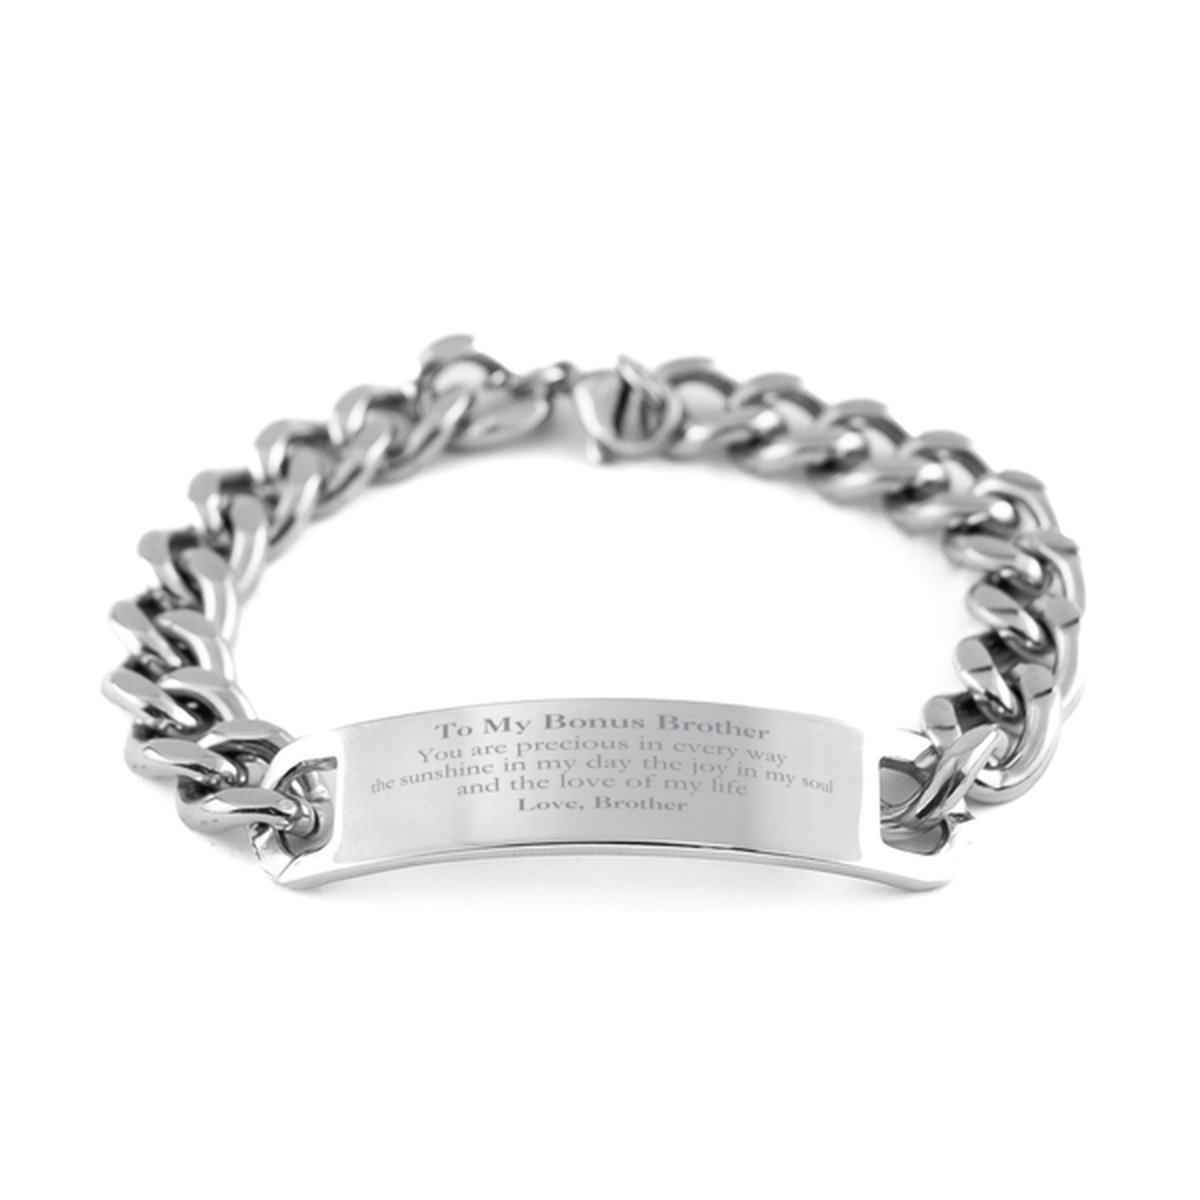 Graduation Gifts for Bonus Brother Cuban Chain Stainless Steel Bracelet Present from Brother, Christmas Bonus Brother Birthday Gifts Bonus Brother You are precious in every way the sunshine in my day. Love, Brother